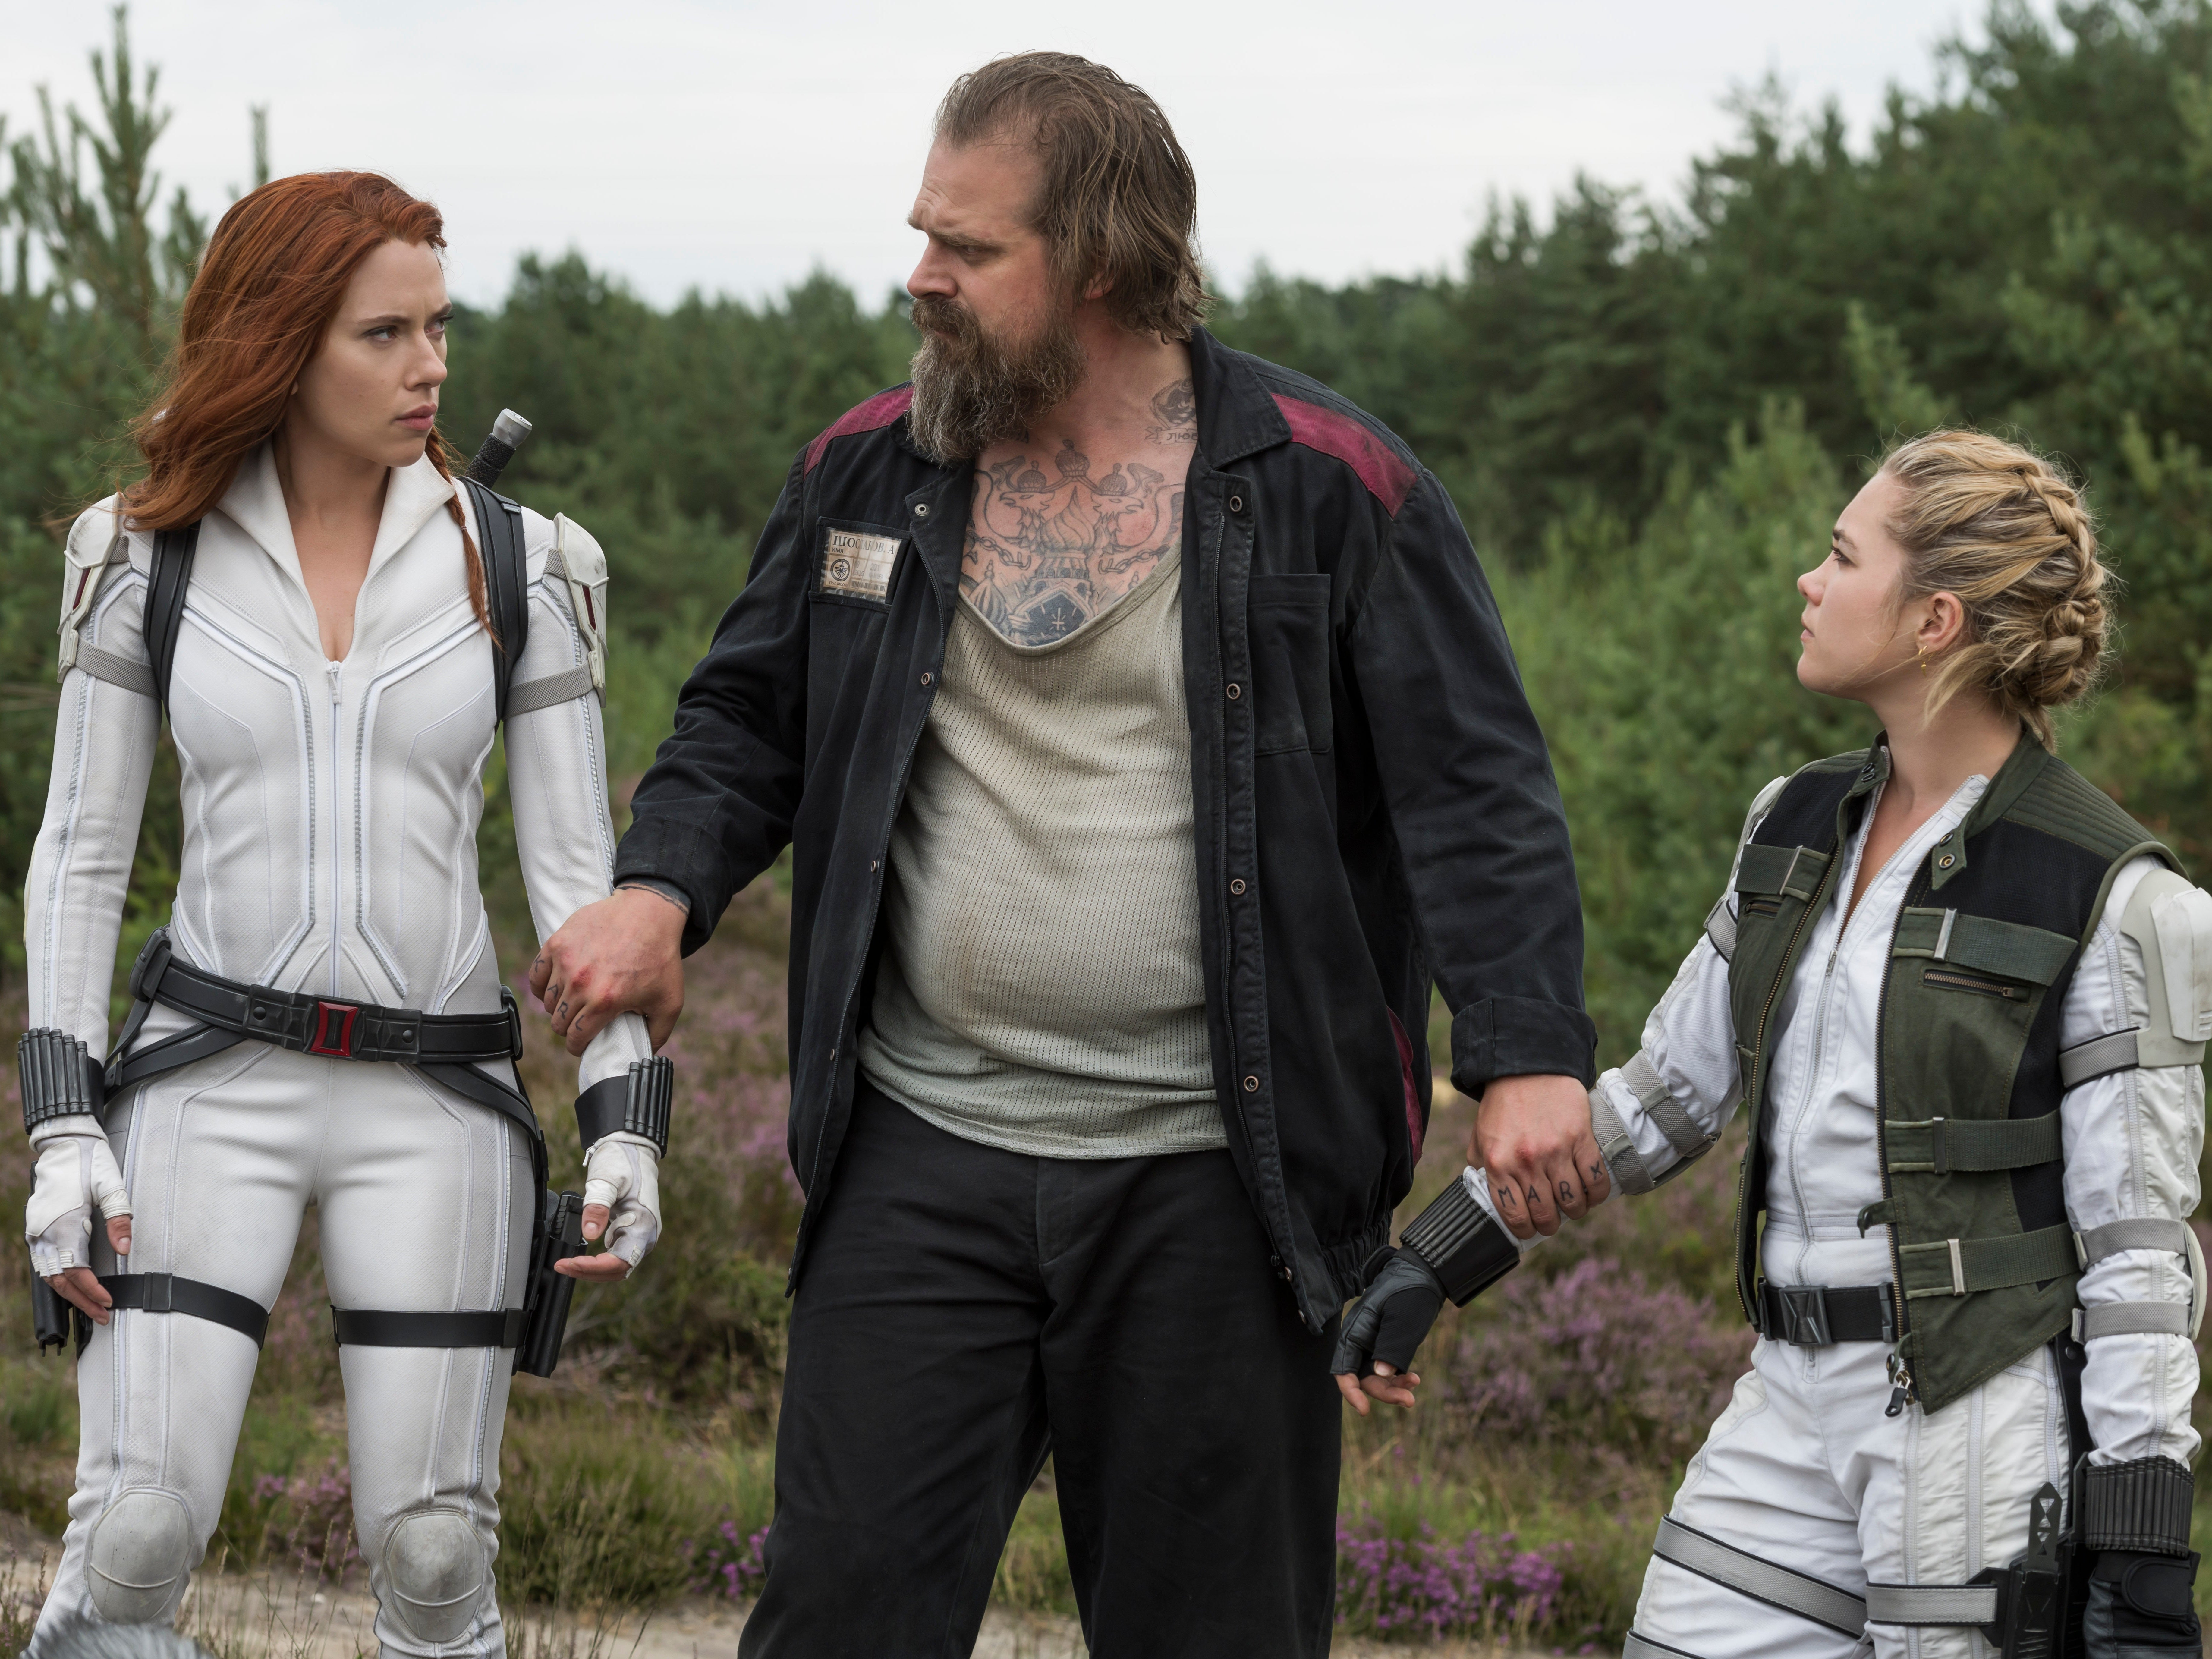 Harbour with Scarlett Johansson and Florence Pugh in ‘Black Widow’